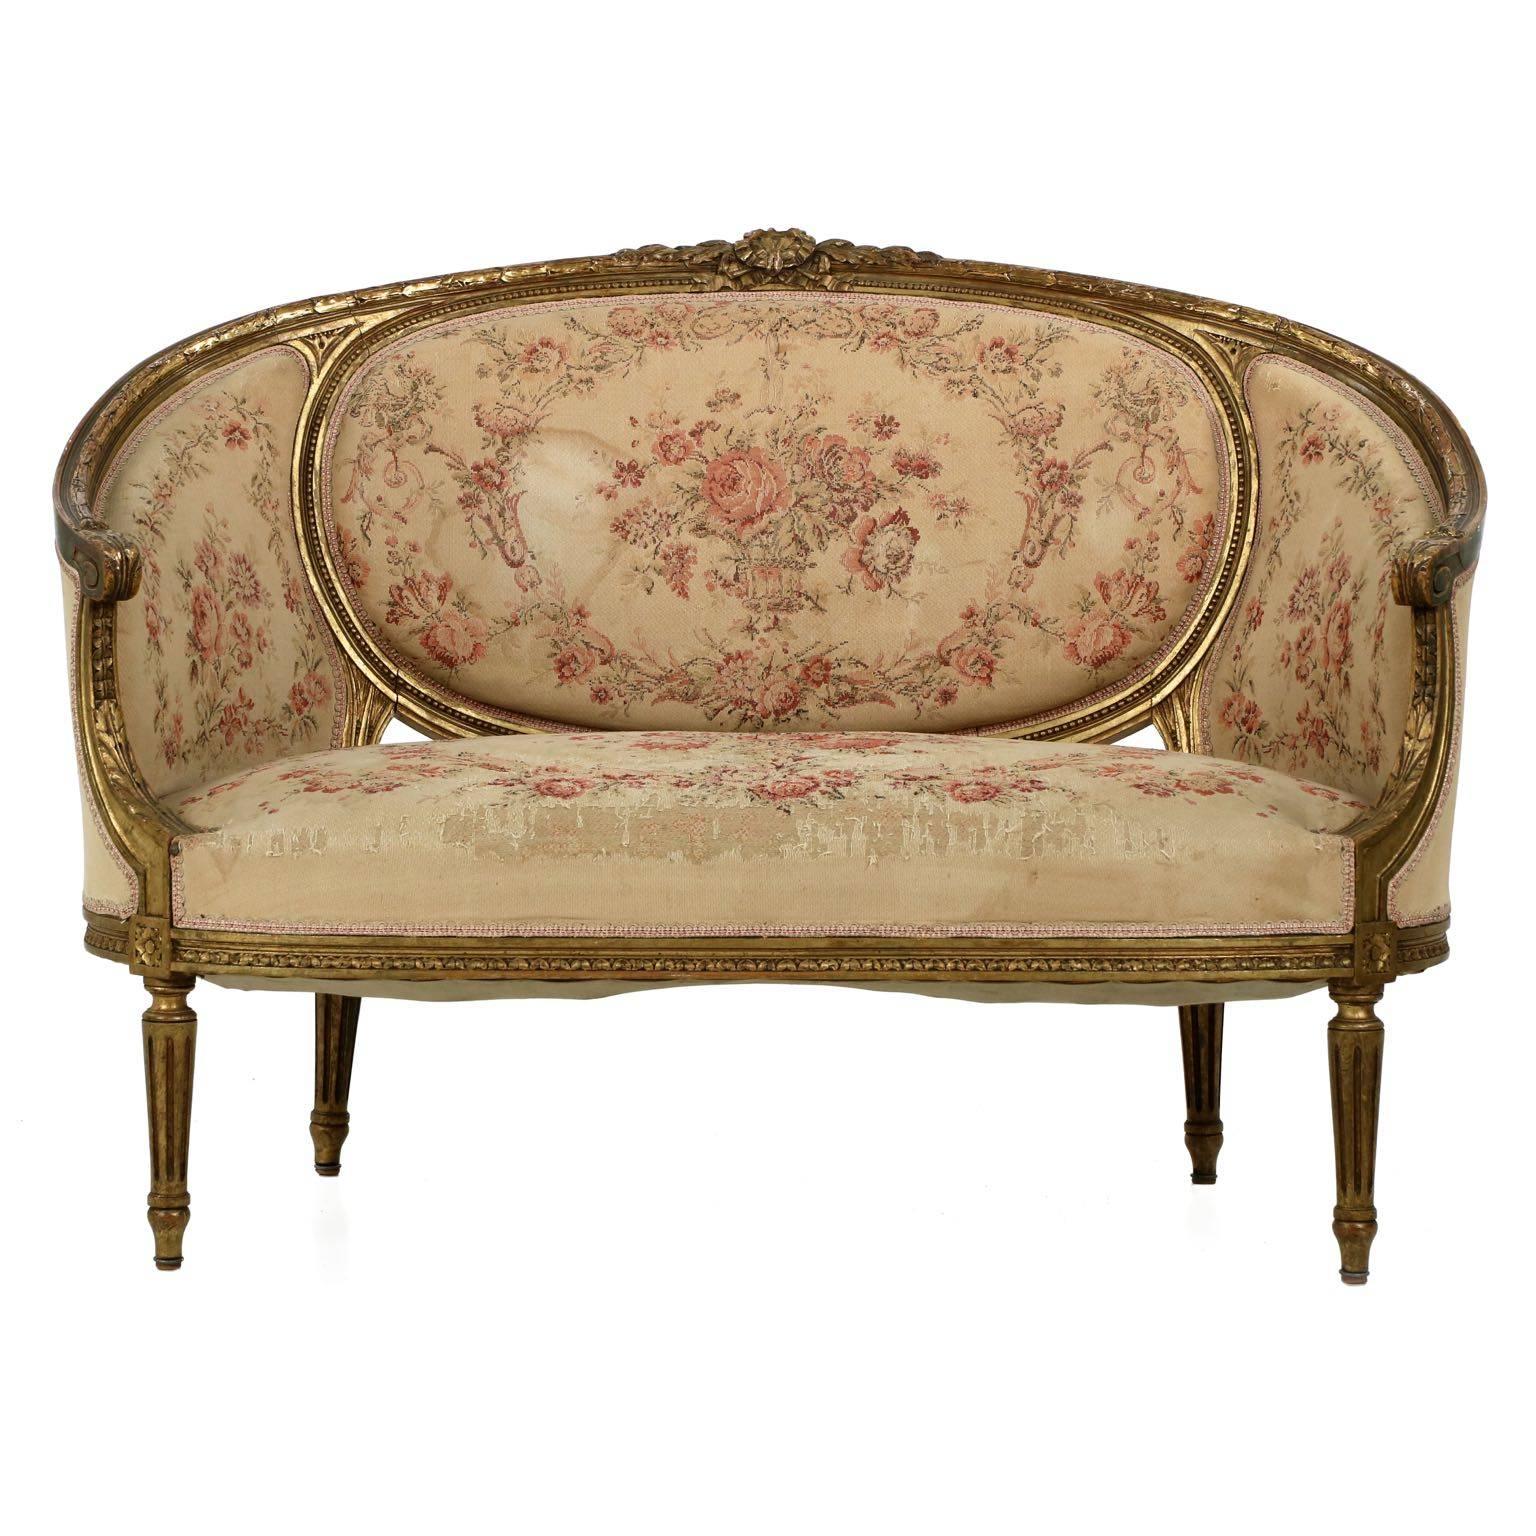 French Louis XVI Style Carved Giltwood Antique Canape Settee Sofa, 19th Century